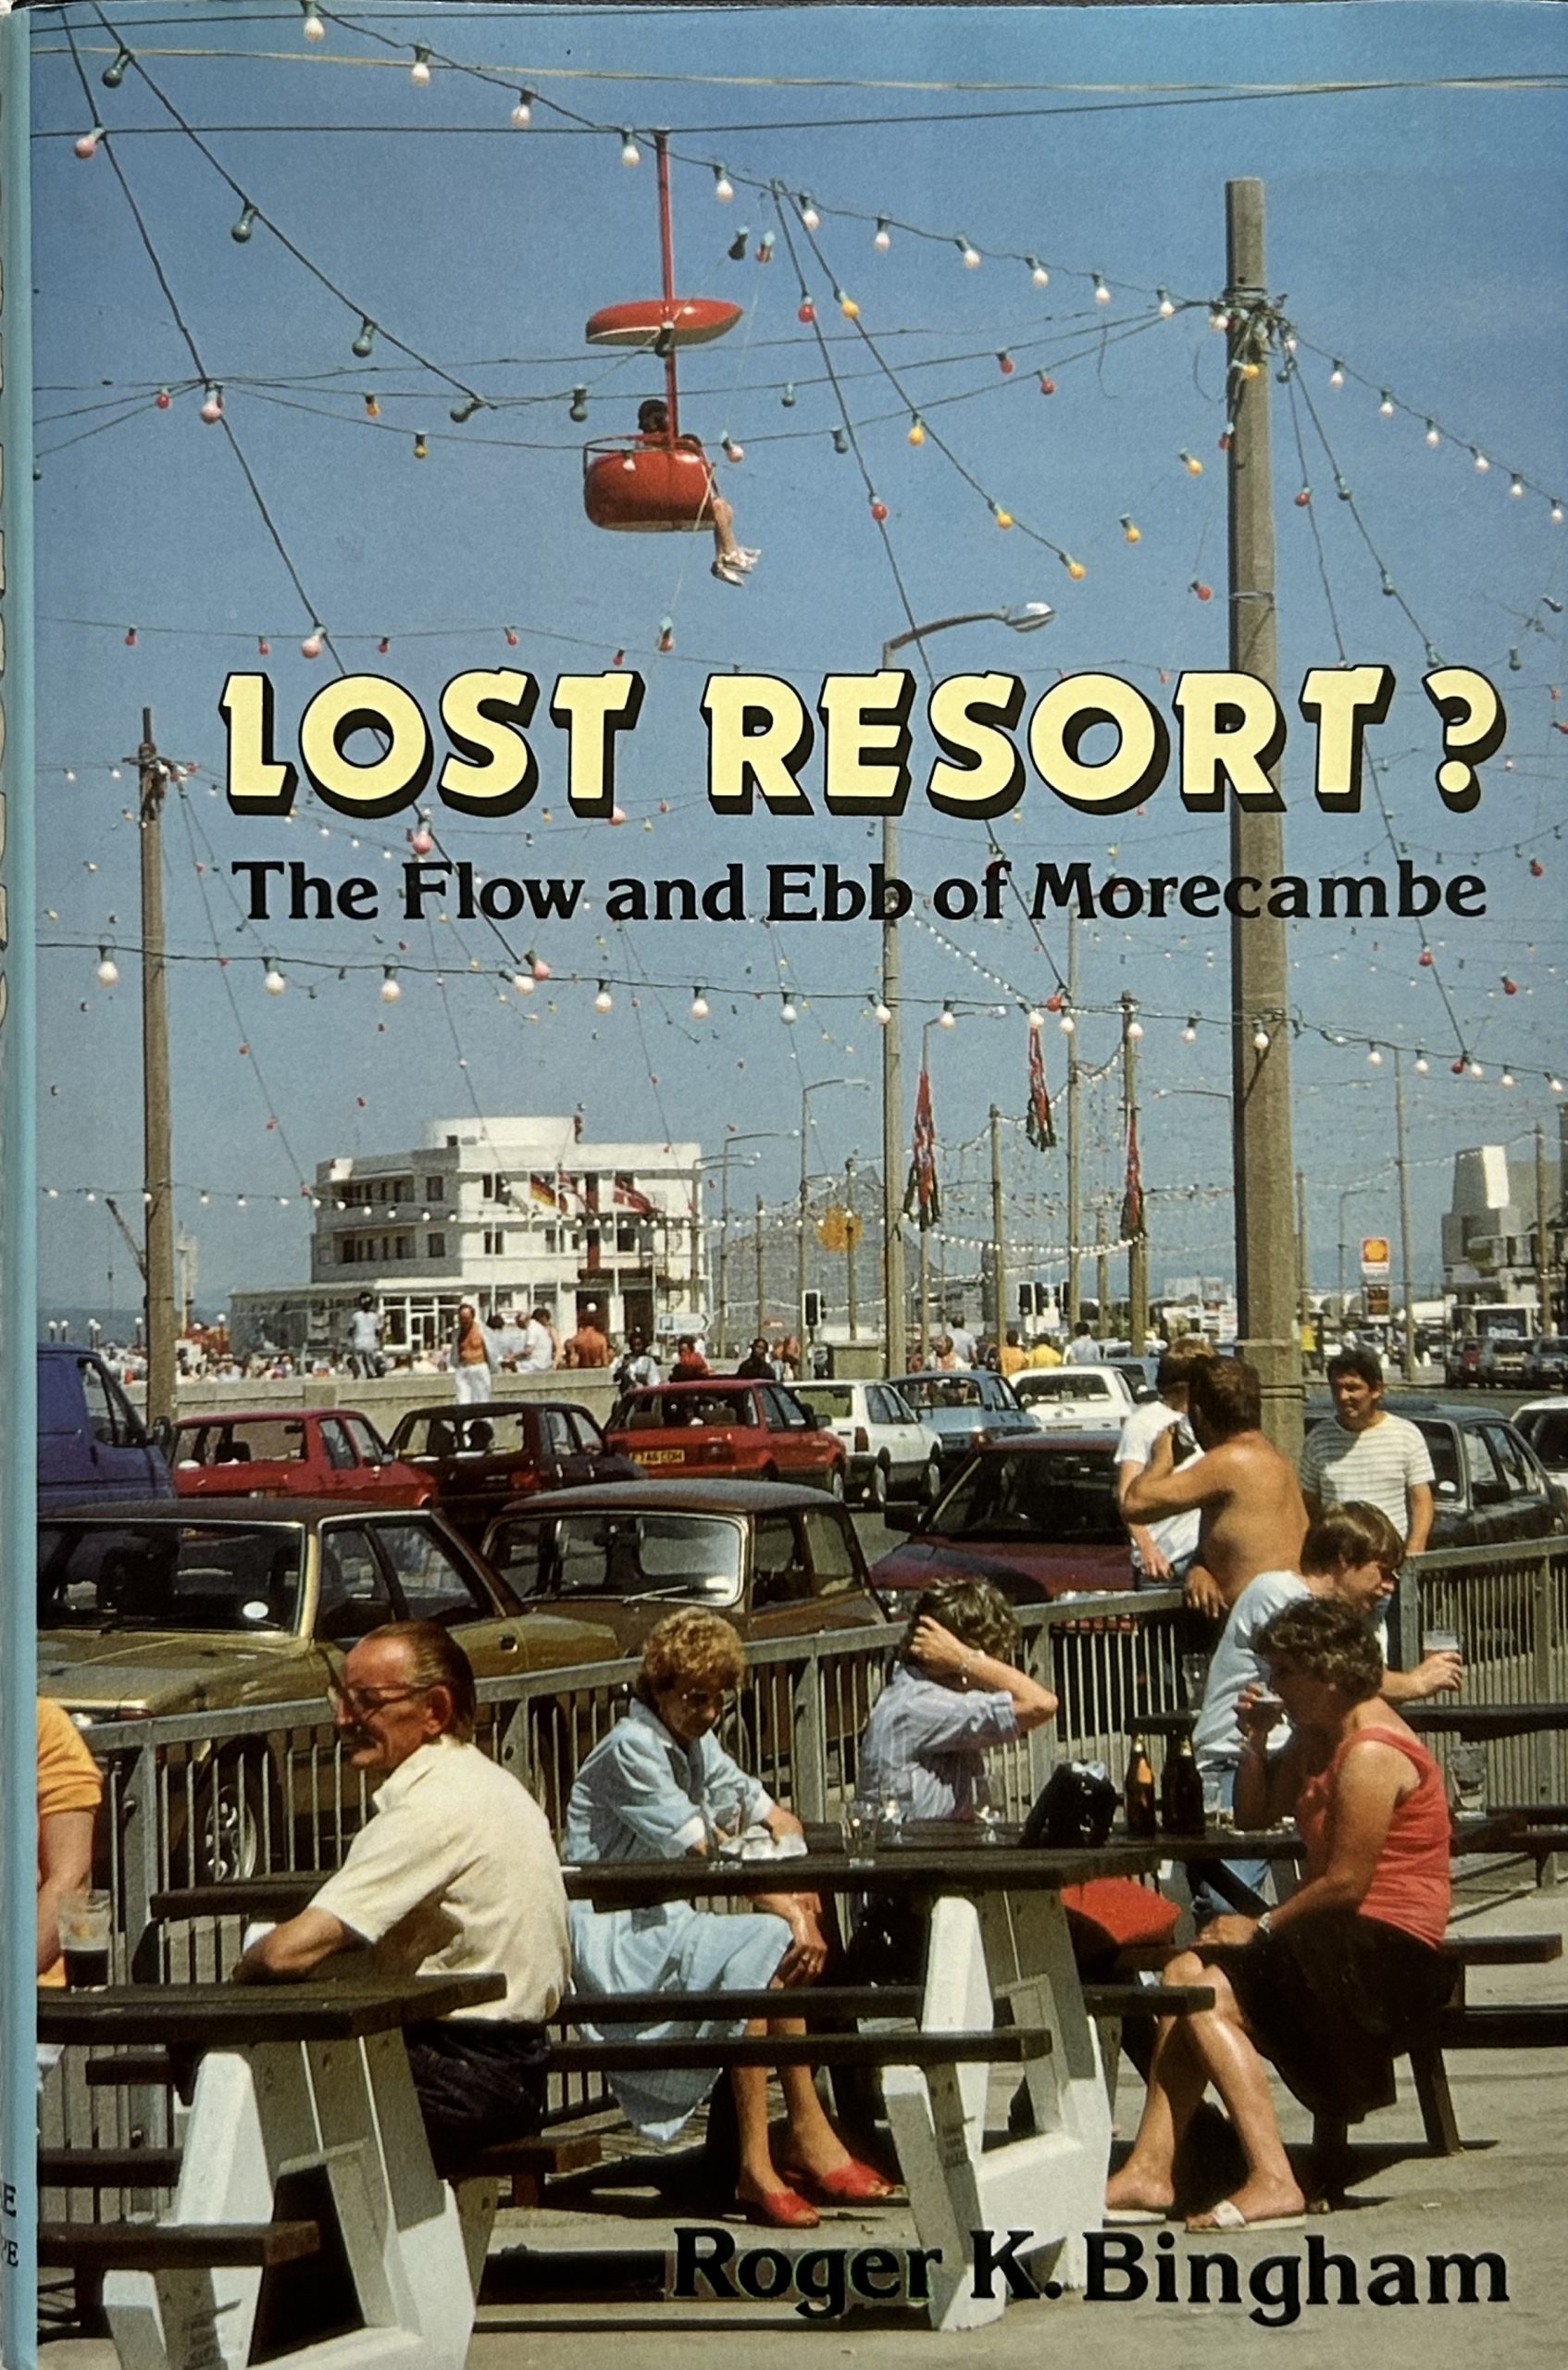 The Lost Resort? The Flow and Ebb of Morecambe By Roger K. Bingham